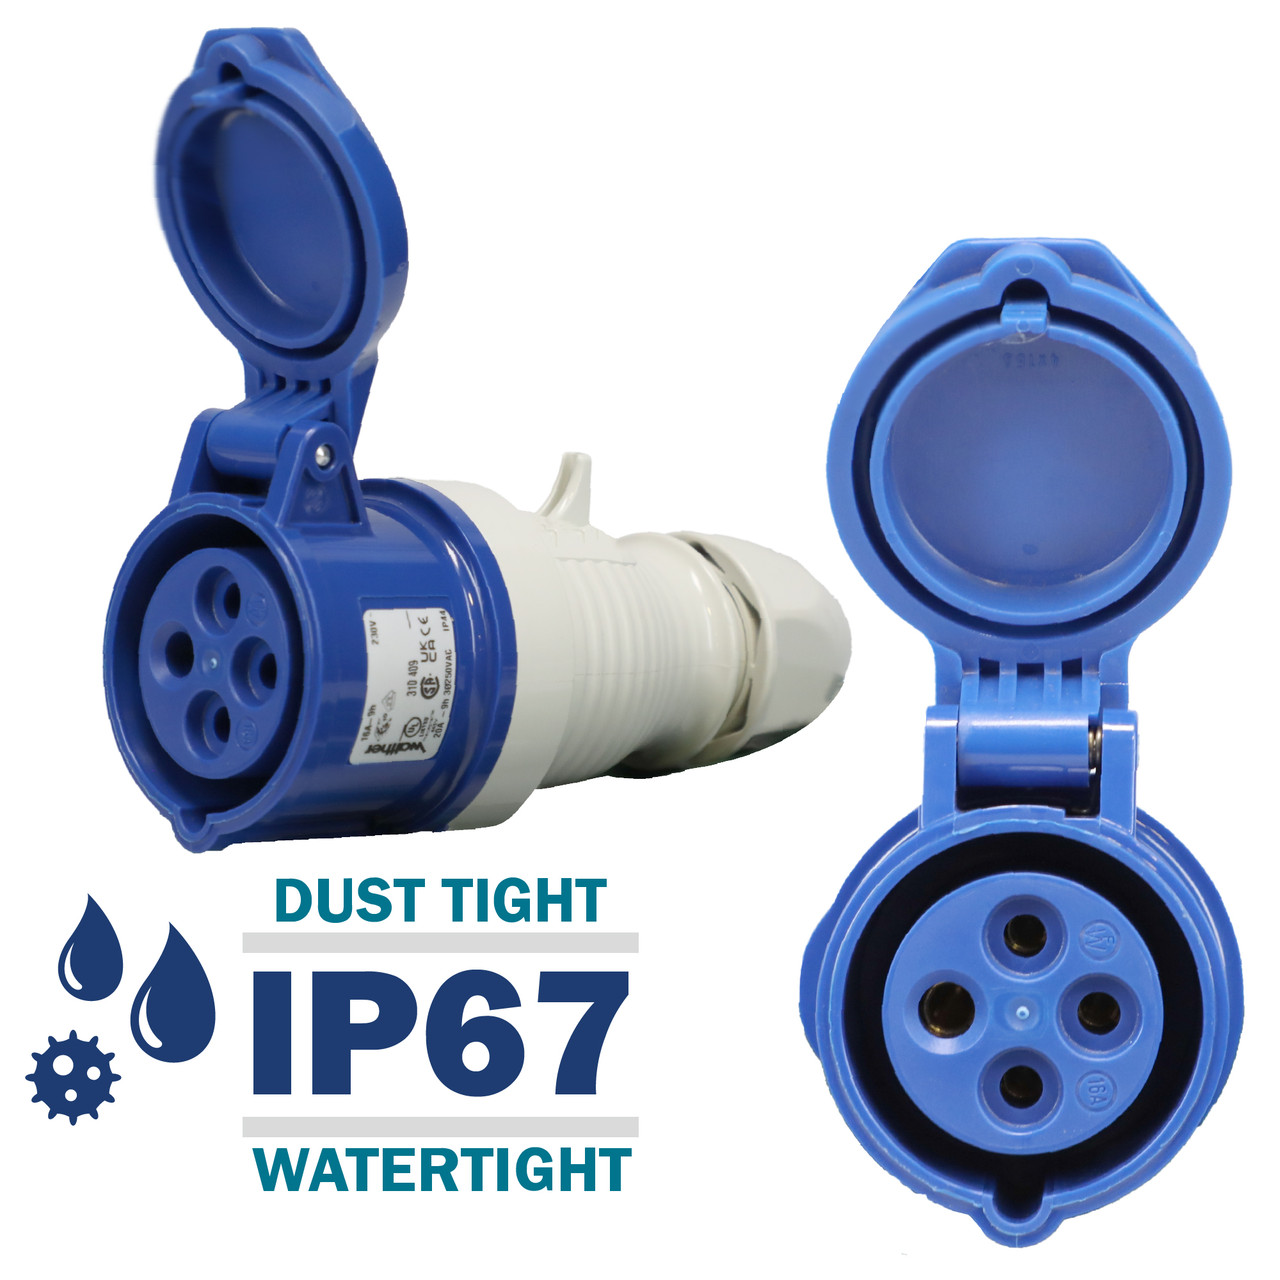 310409 Connector carries an environmental rating of IP44 Splashproof